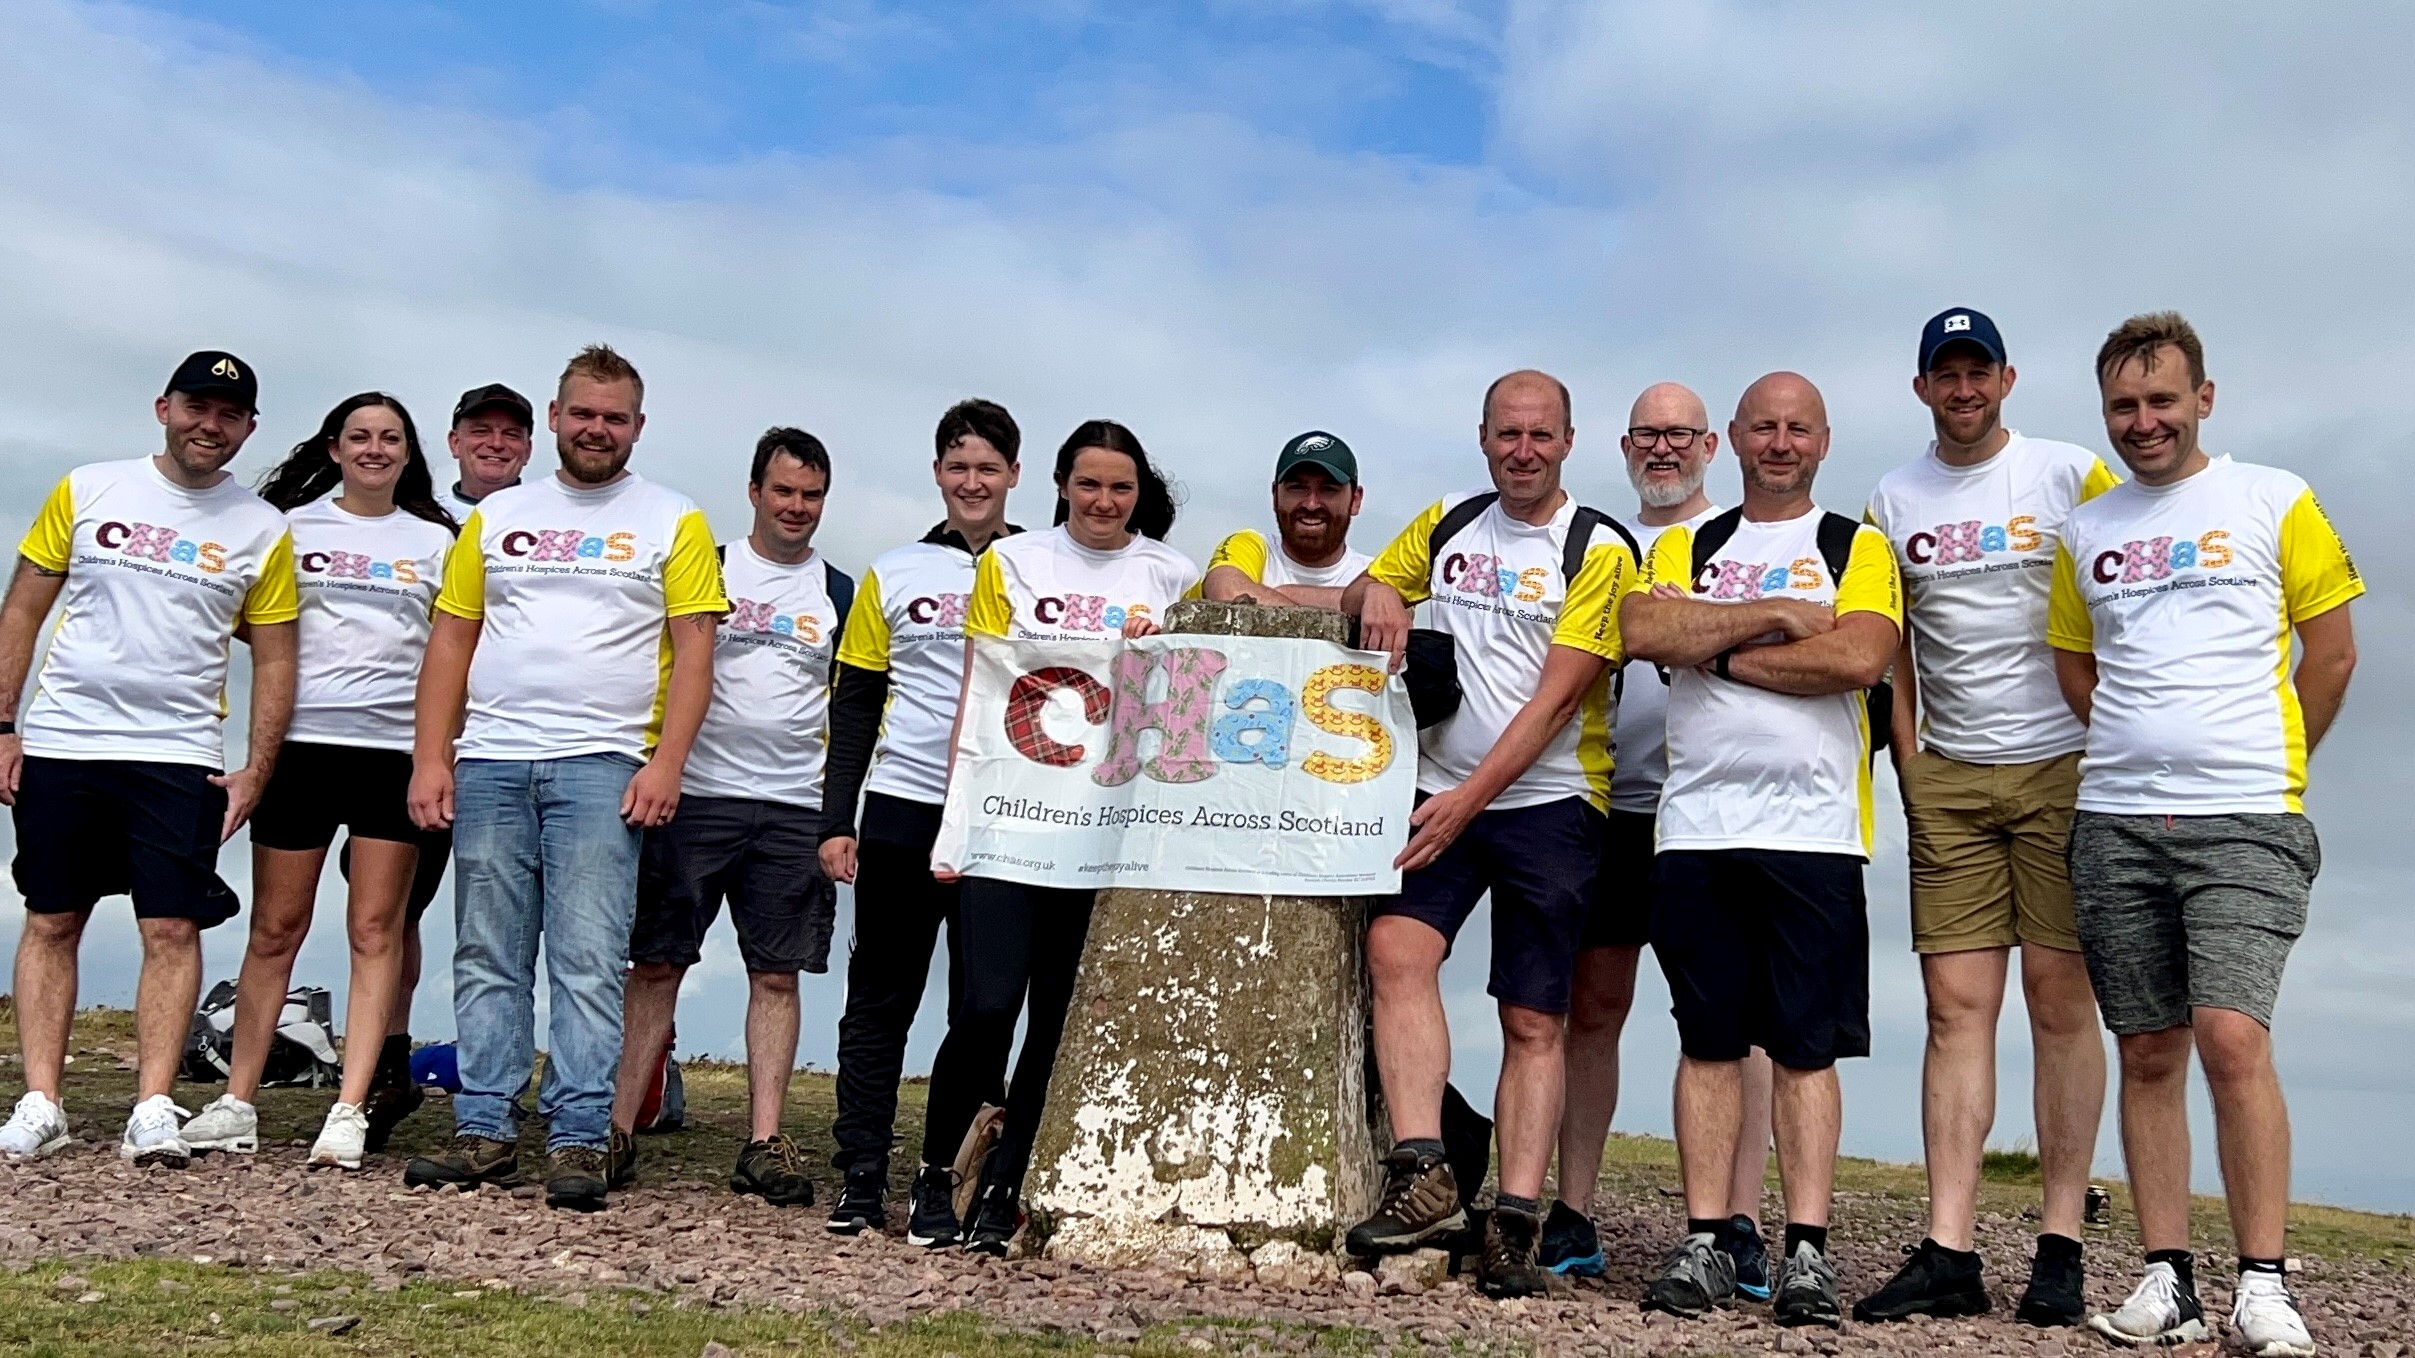 Summers-Inman charity walk raises £2,600 for CHAS